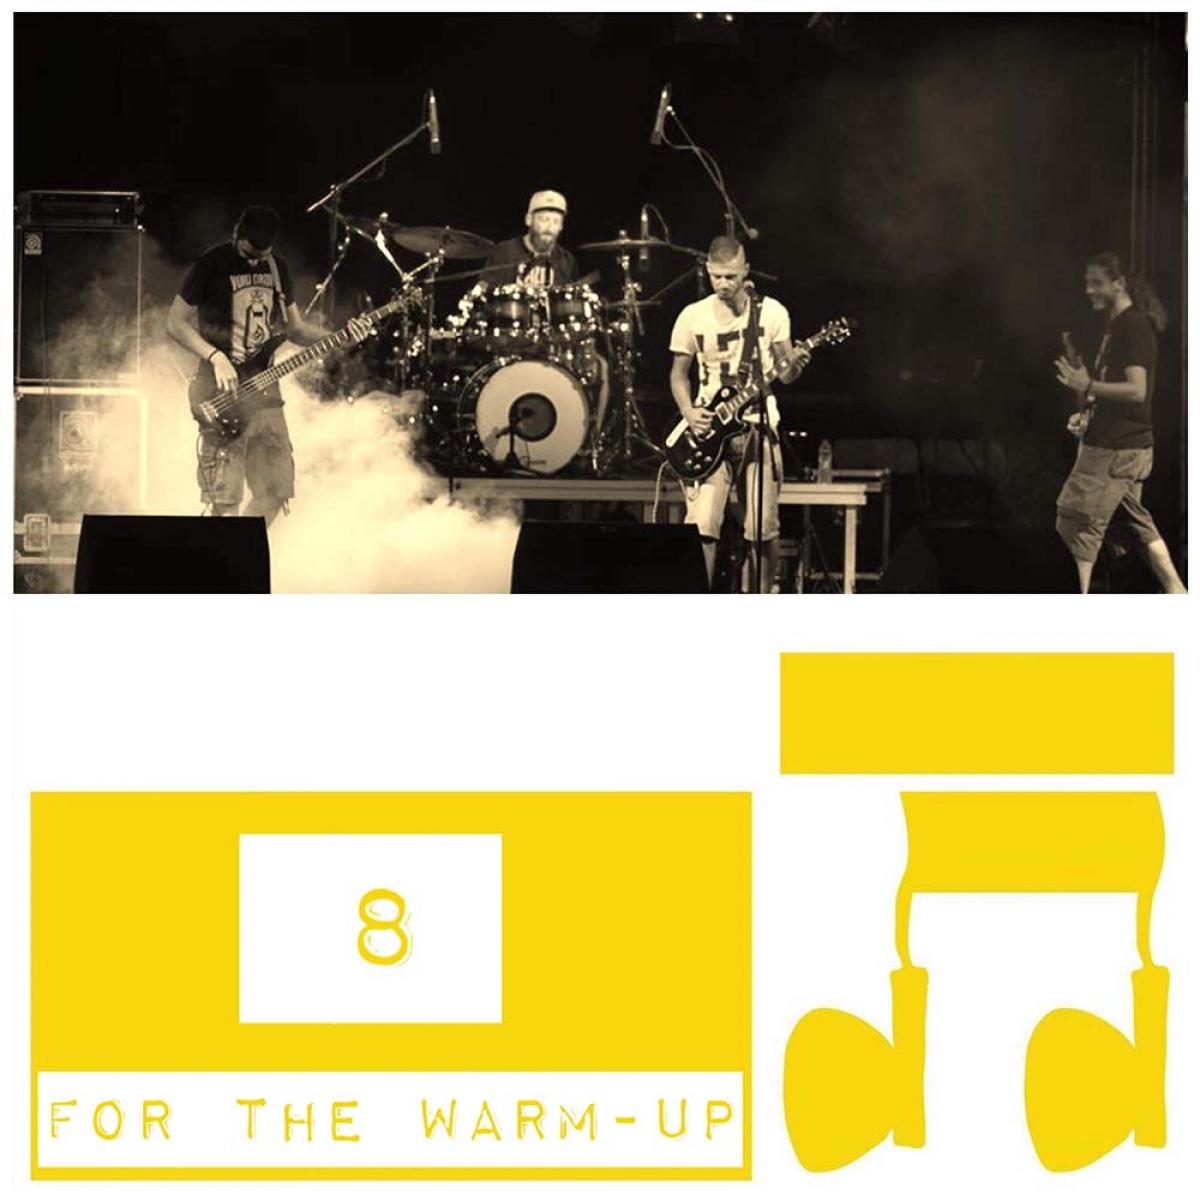 8 For The Warm-Up: Salto Mortale